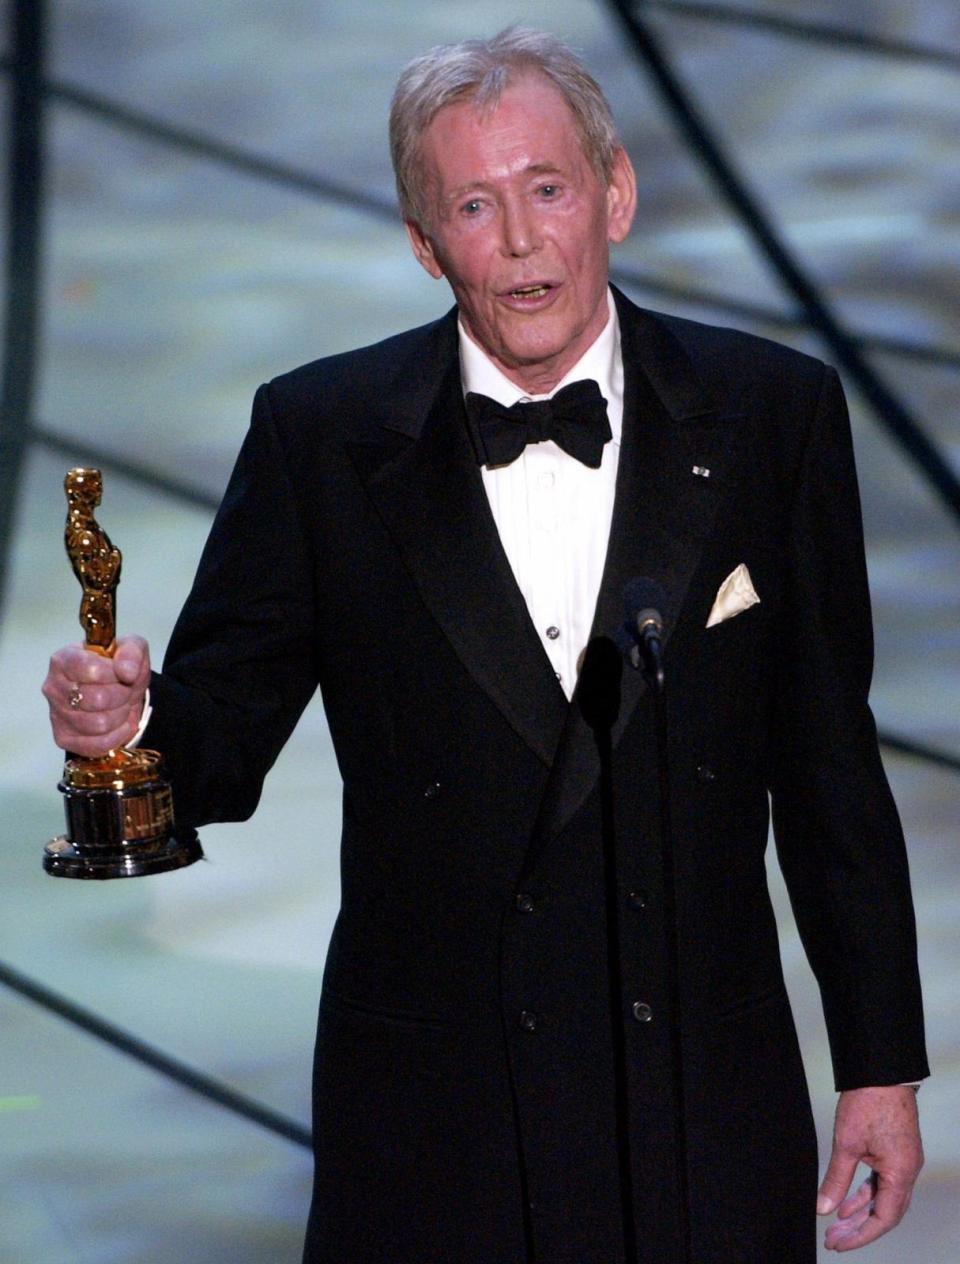 PHOTO: In this March 23, 2003, file photo, actor Peter O'Toole accepts his honorary Oscar from the Academy of Motion Picture Arts and Sciences during the 75th annual Academy Awards telecast in Los Angeles.  (Kevork Djansezian/AP, FILE)